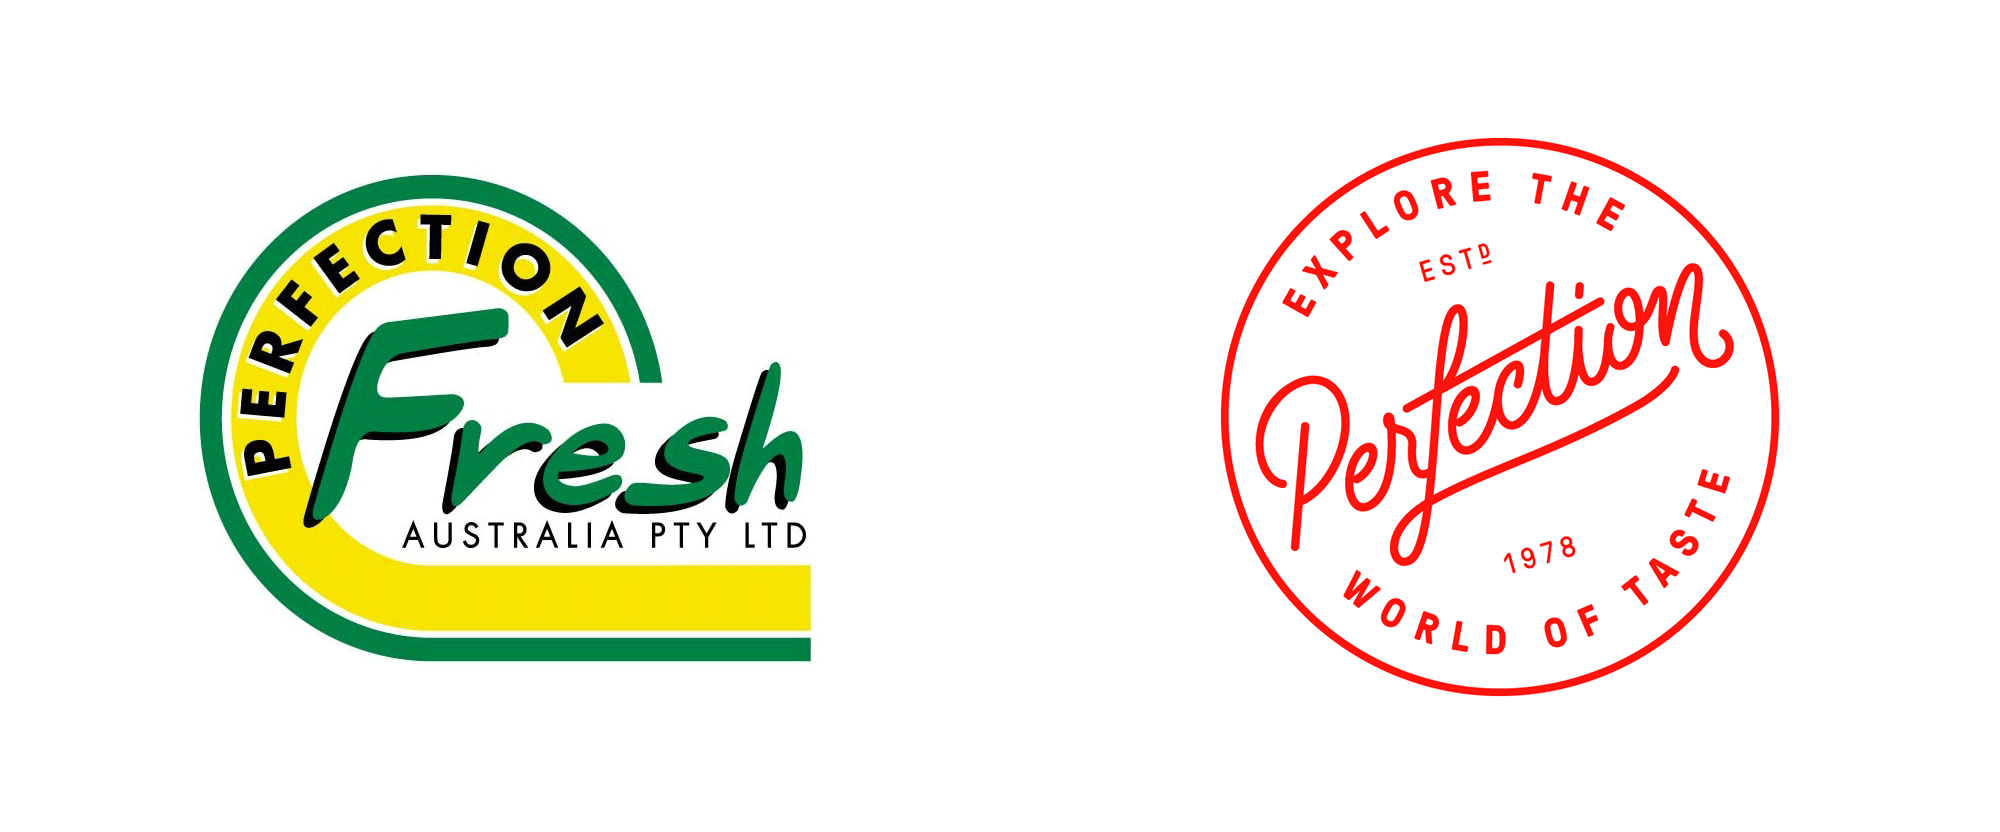 New Logo and Identity for Perfection Fresh by Interbrand